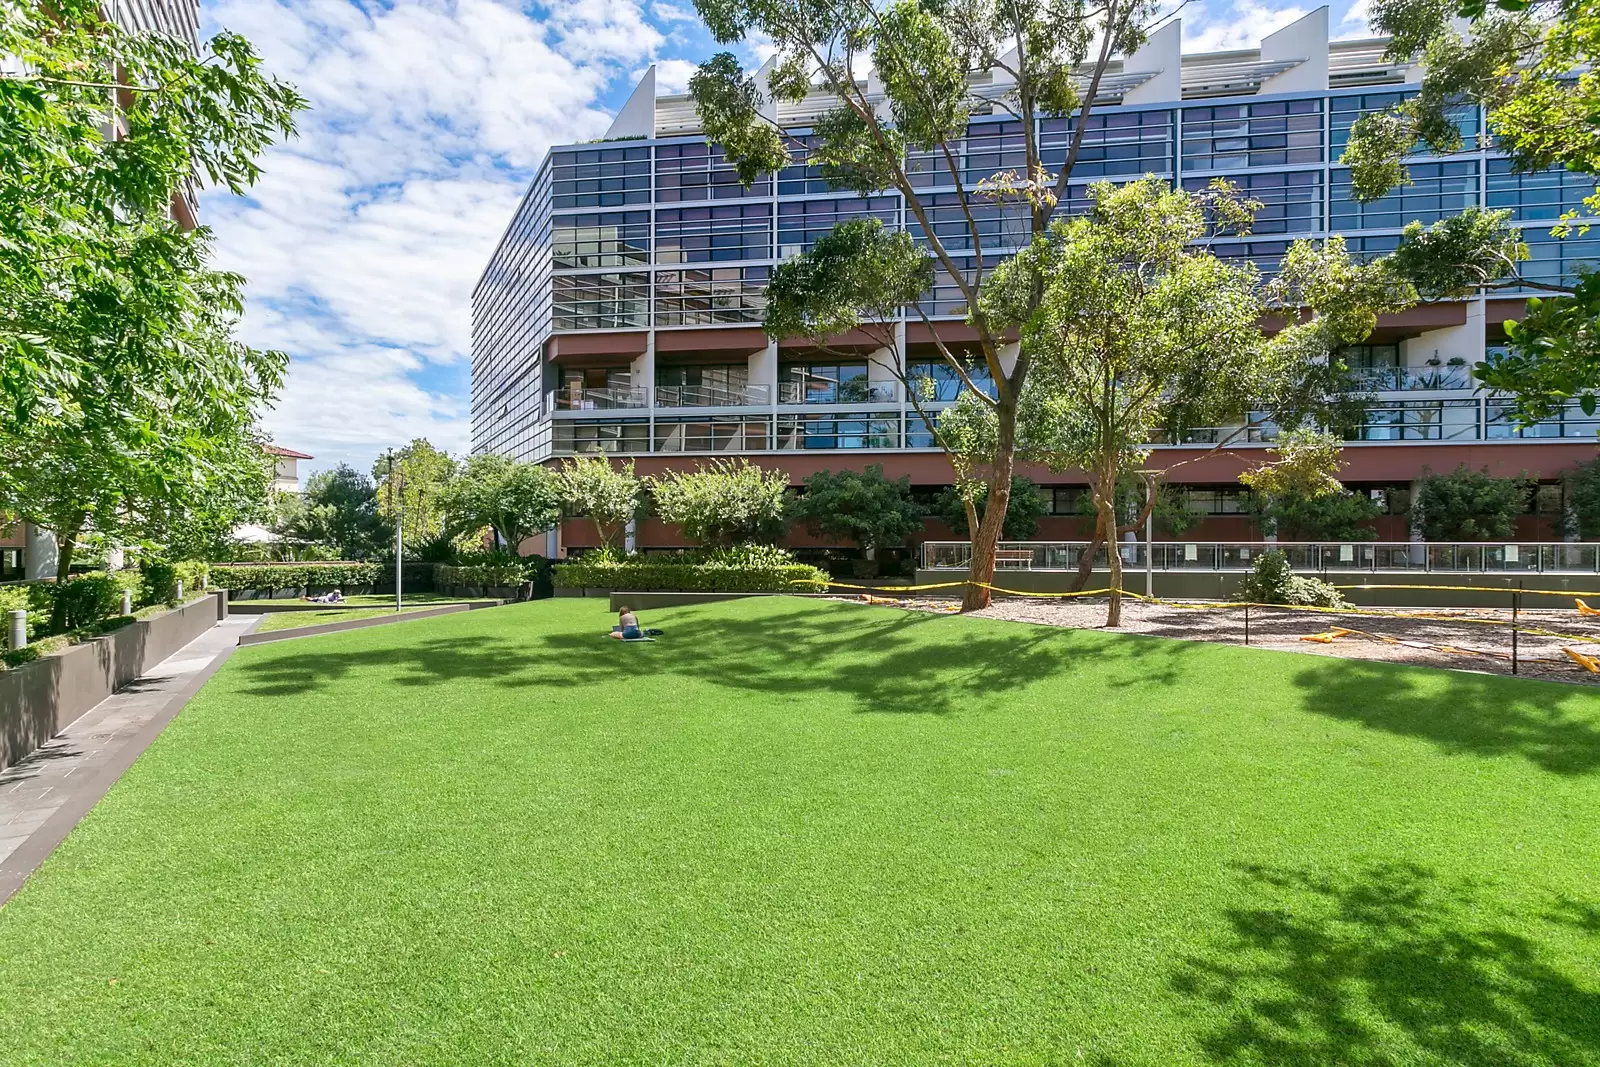 Photo #10: 601D/250 Anzac Parade, Kensington - Sold by Sydney Sotheby's International Realty